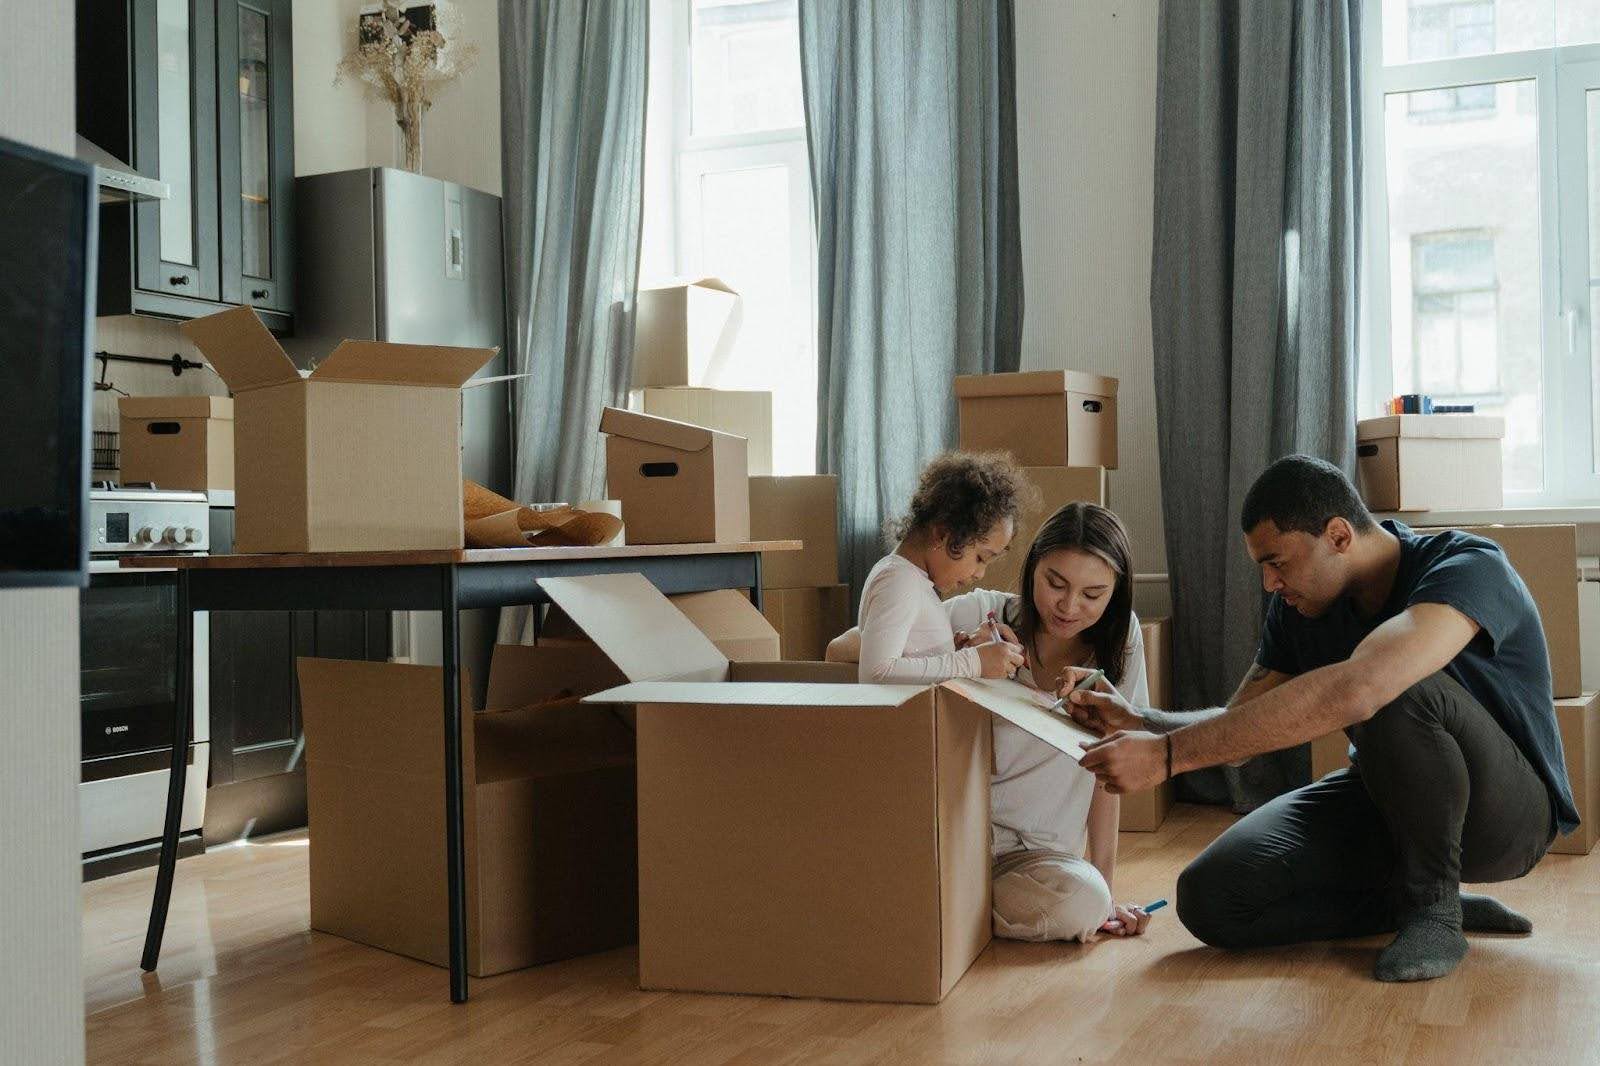 A family packing boxes getting ready for a move